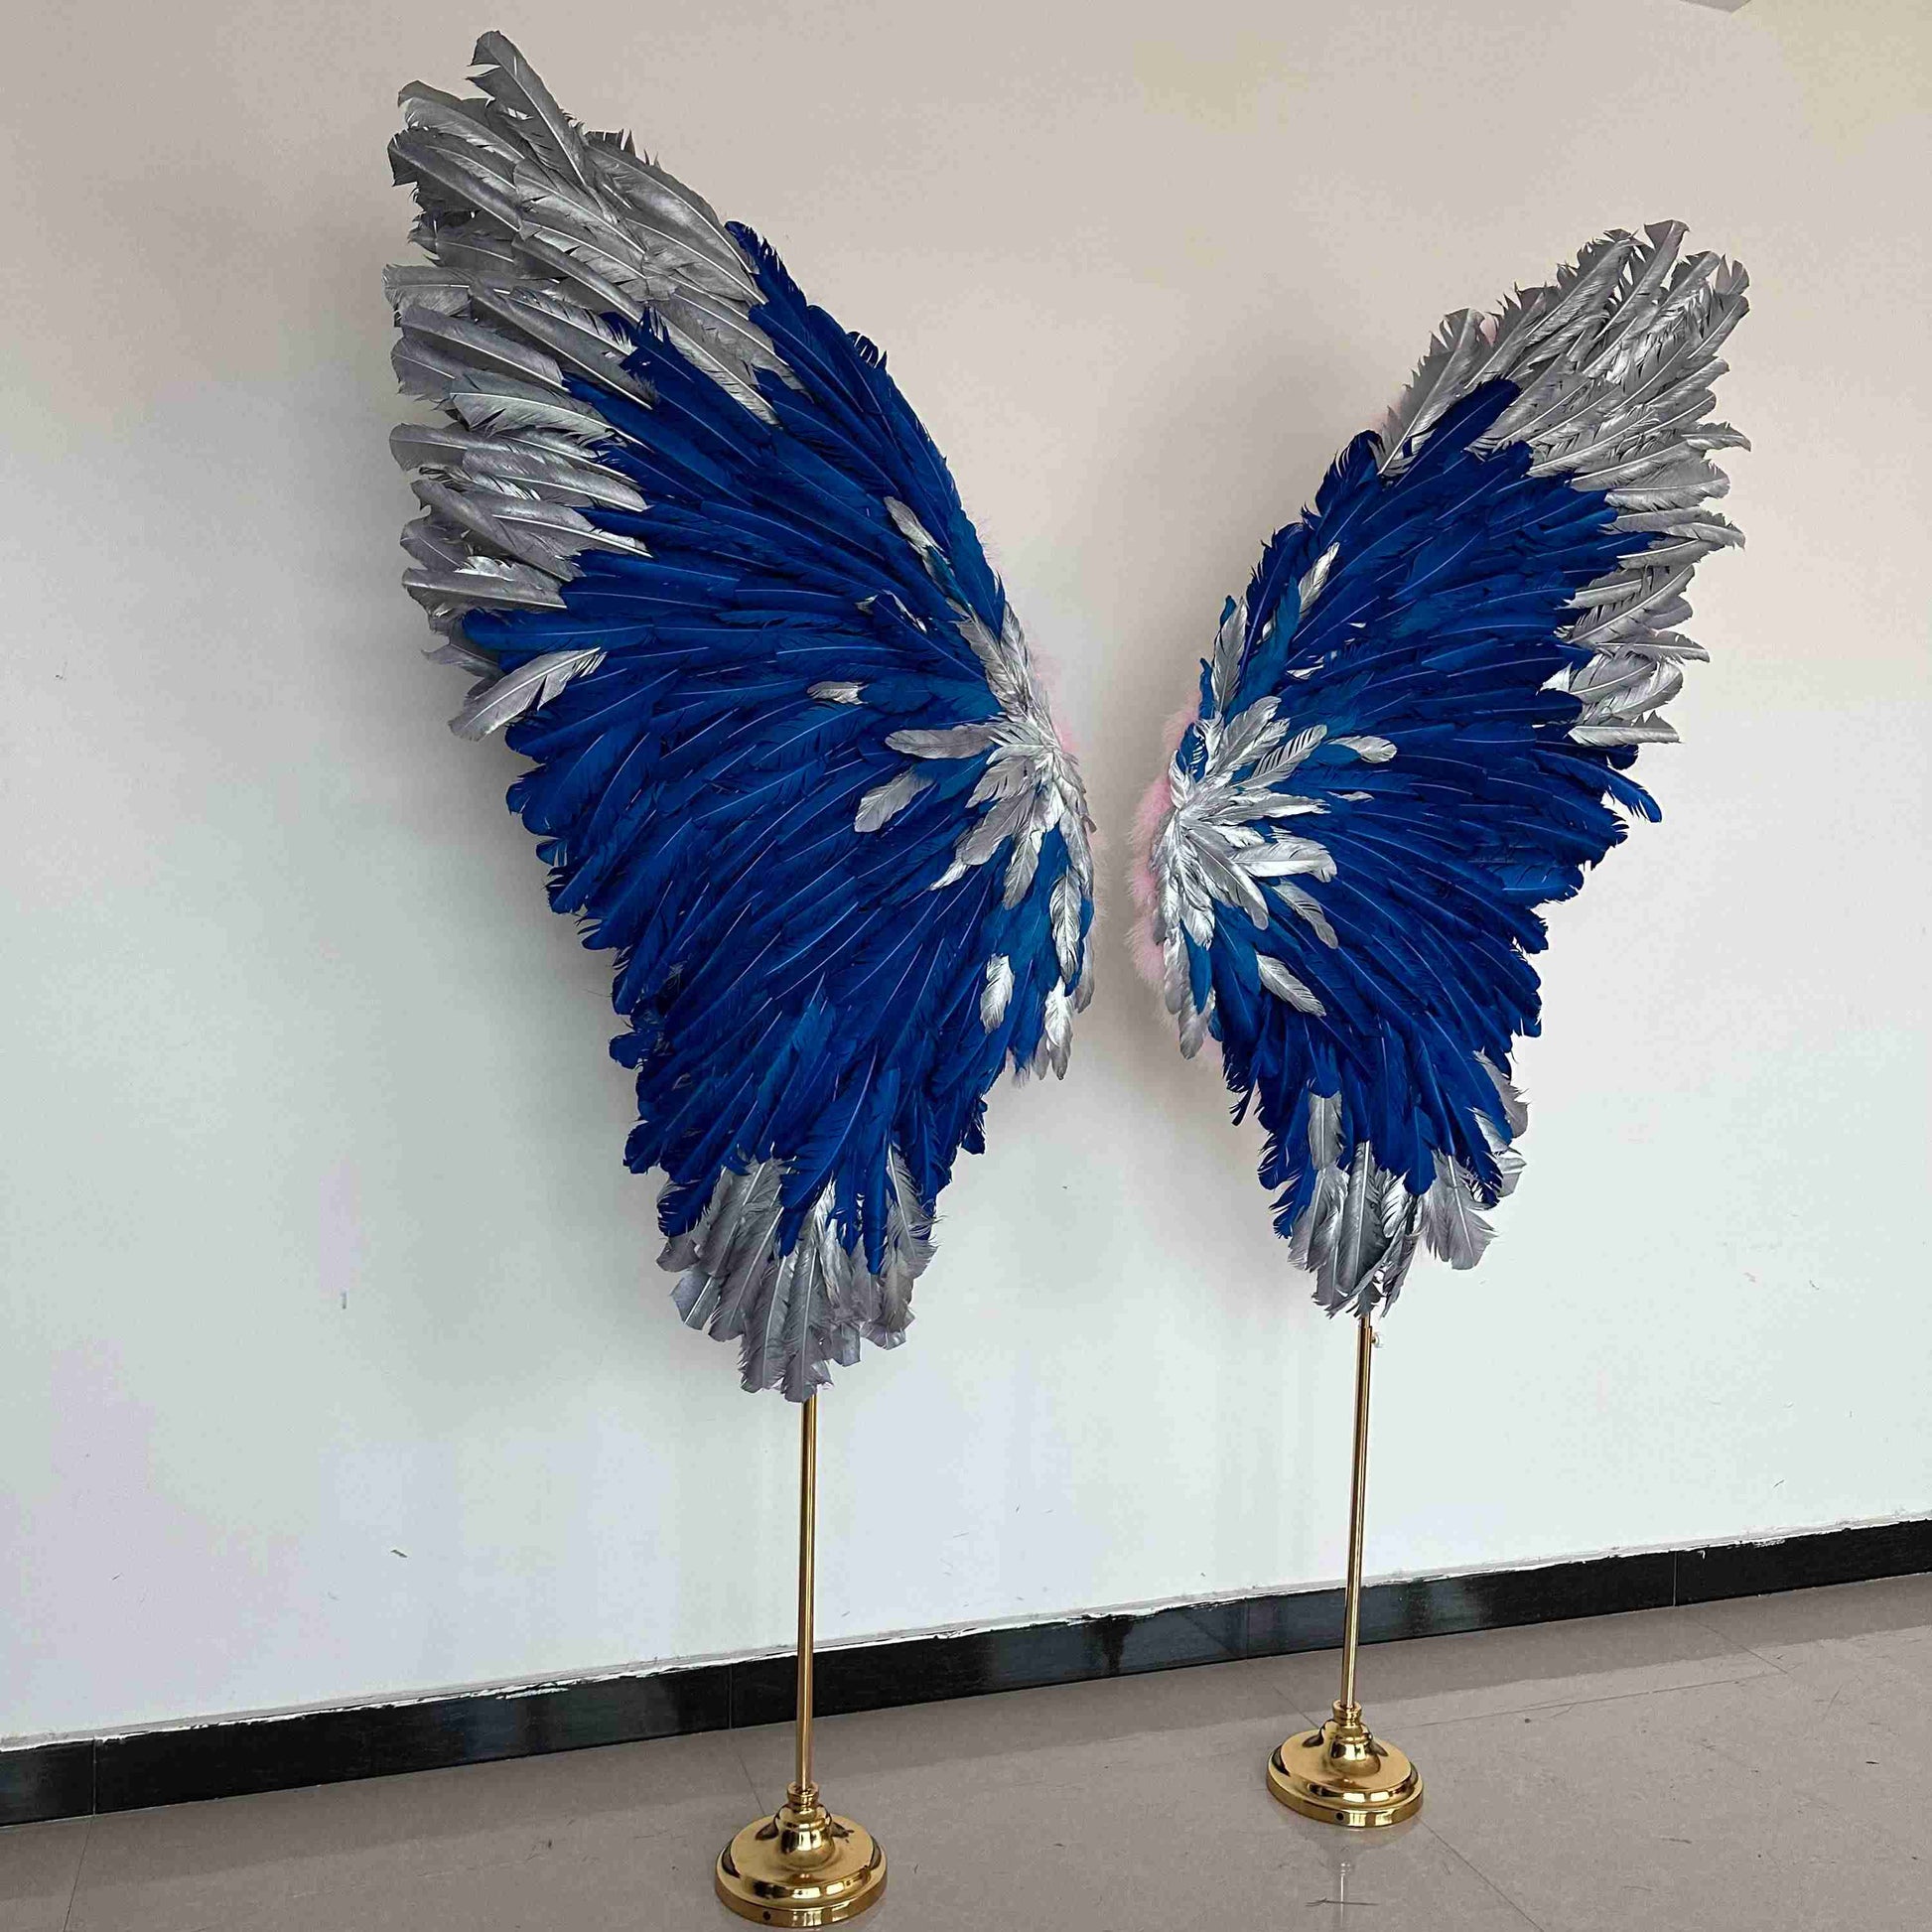 Our silver blue angel wings on poles from the right side. Made from goose feathers. Wings for decoration. Suitable for restaurant, cafe, night club, event decorations.